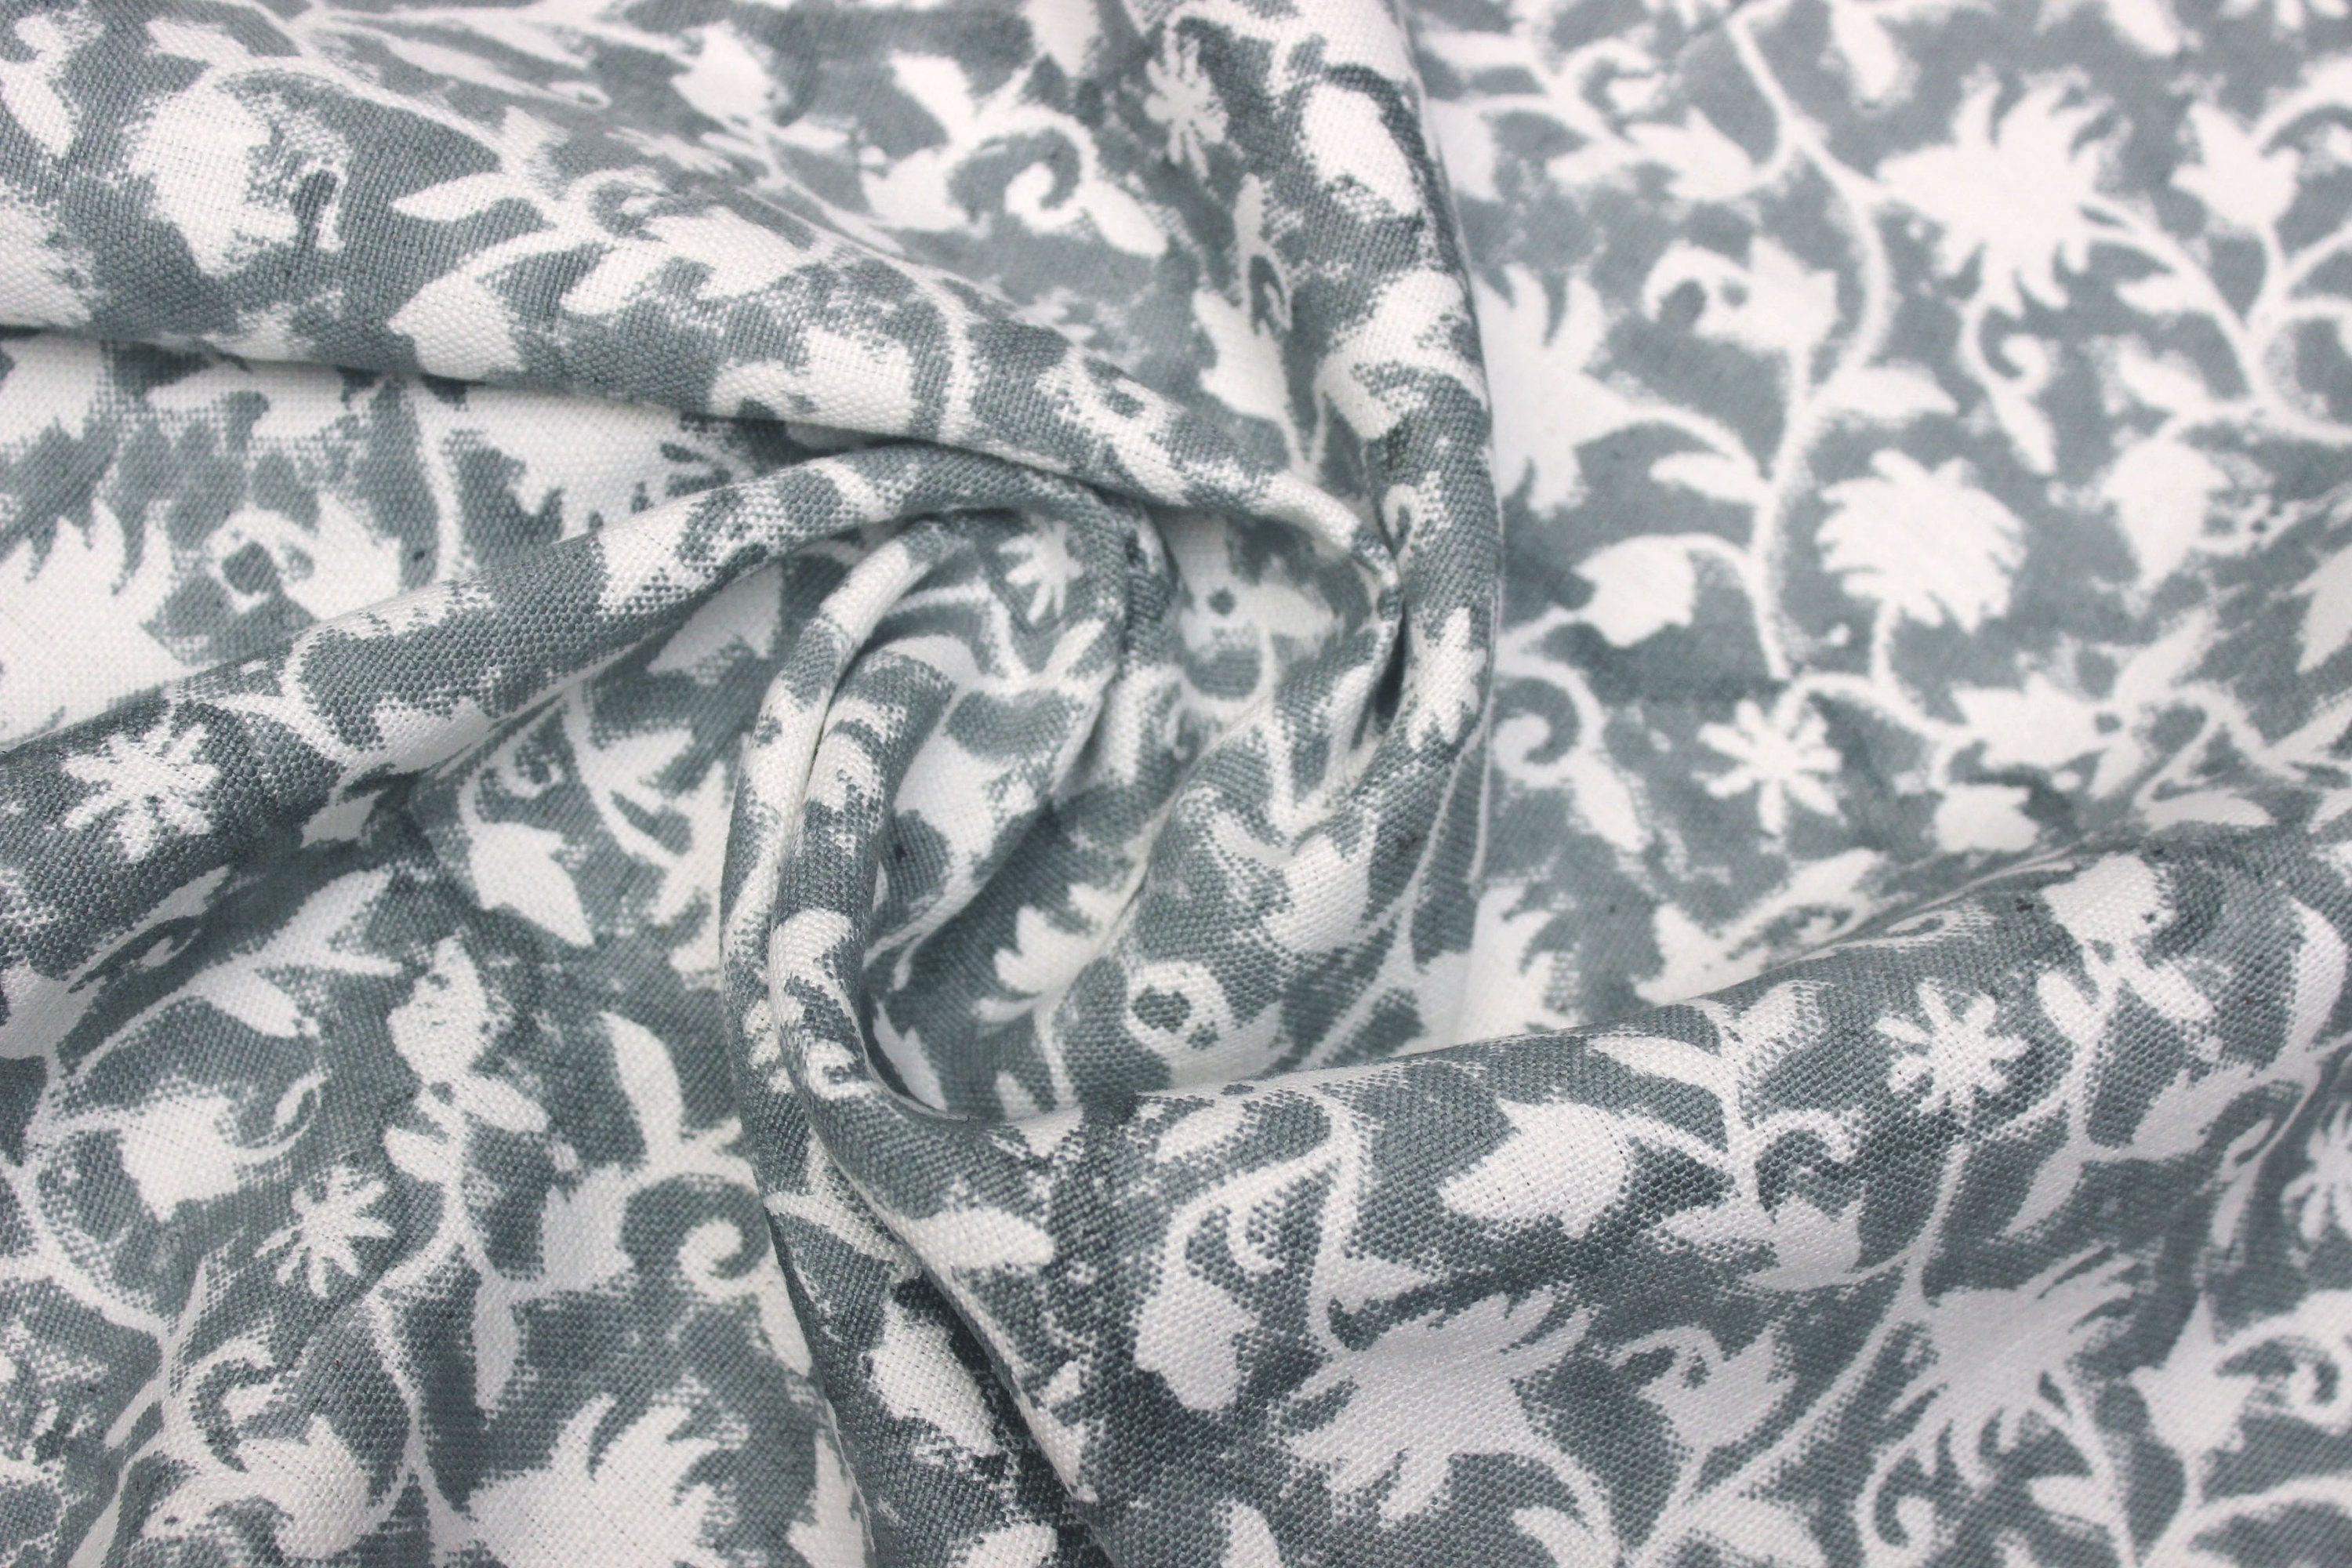 Block Print Linen Fabric, Zelly Fish  Floral Linen Fabric, Block Print Fabric, Flower Printed Fabric By The Yard, Block Pillow Covers, Heavy Linen Upholstery